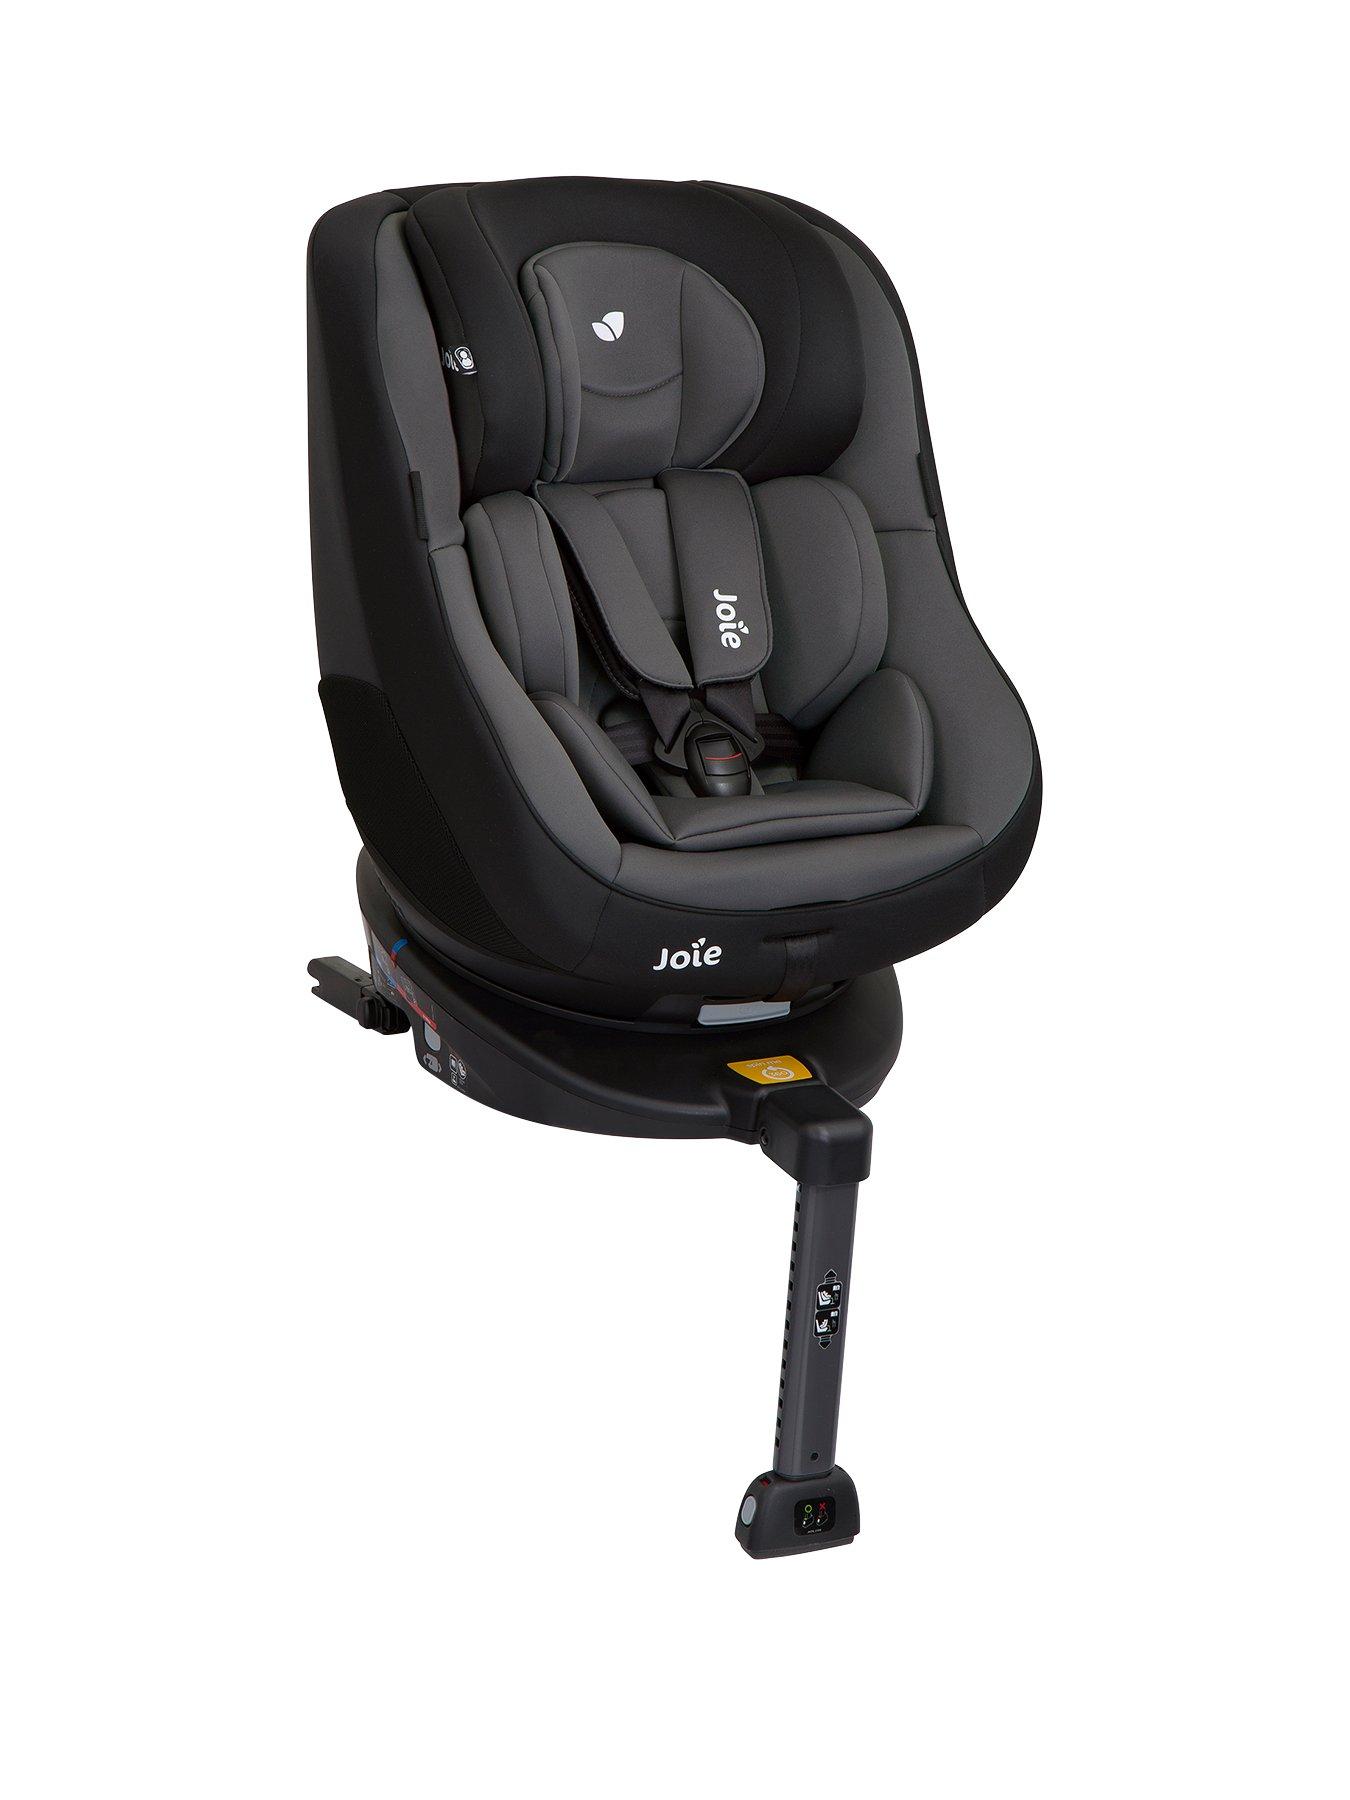 best isize rotating car seat